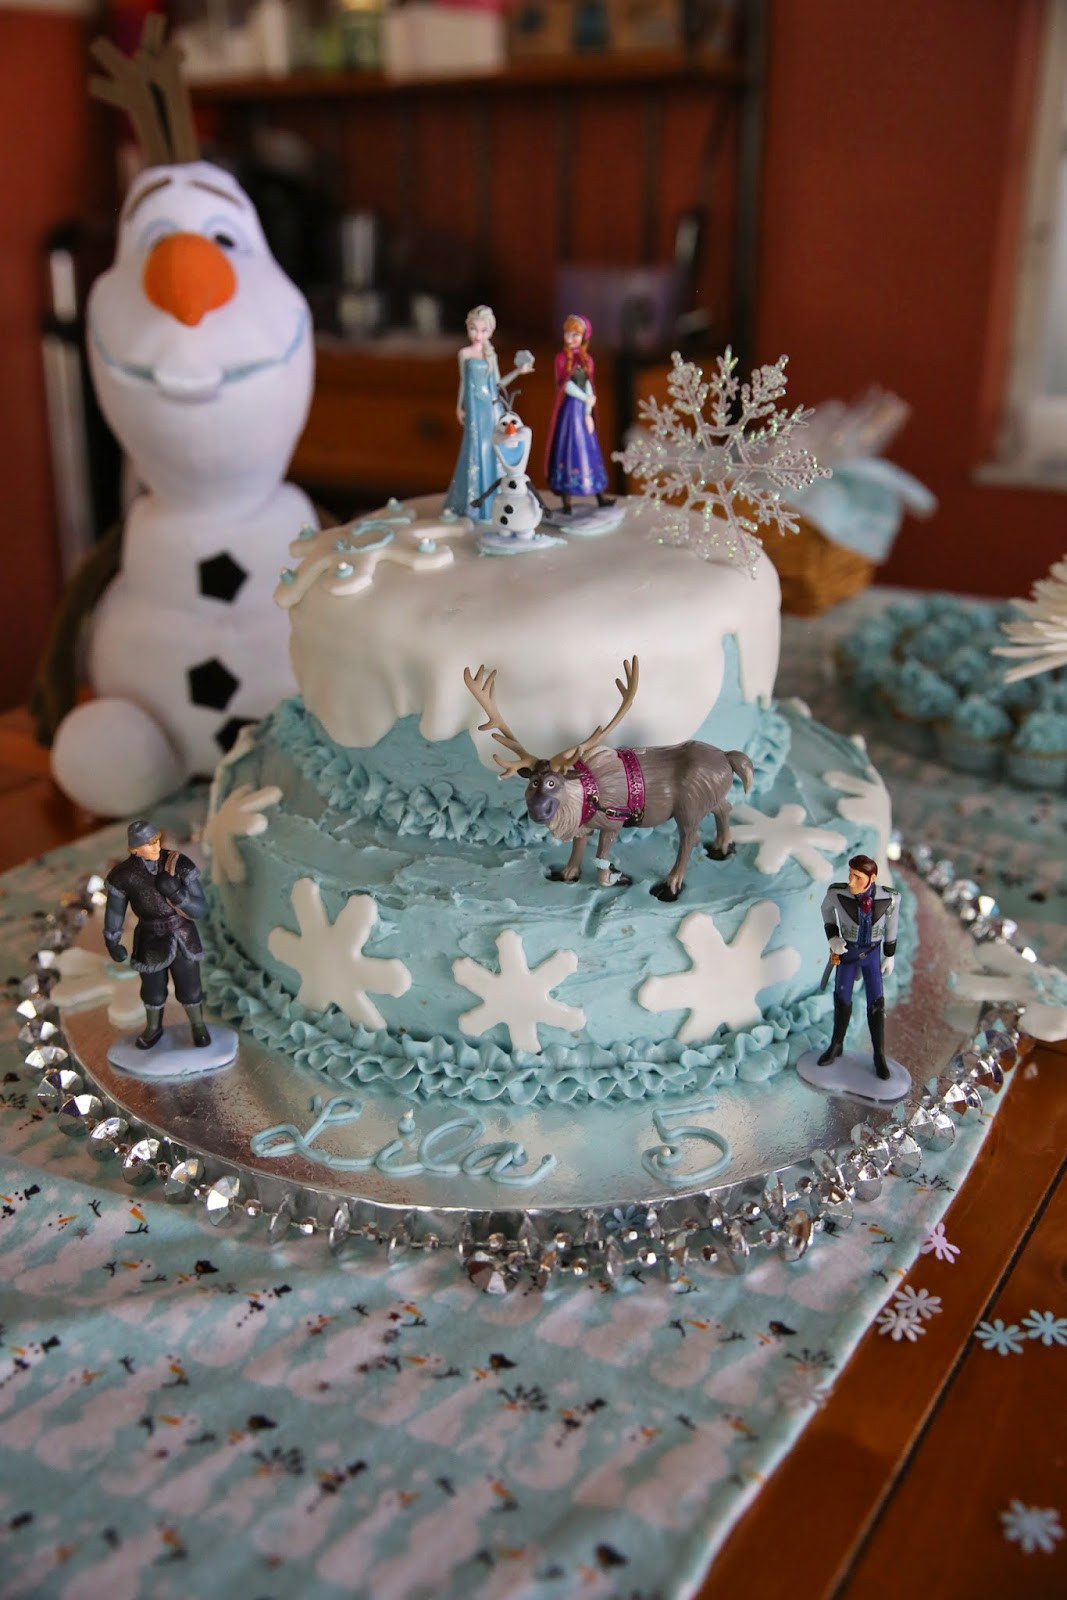 Frozen Birthday Cake Decorations
 Frozen Fractals All Around Must Haves for a Frozen Birthday Party Counting Candles